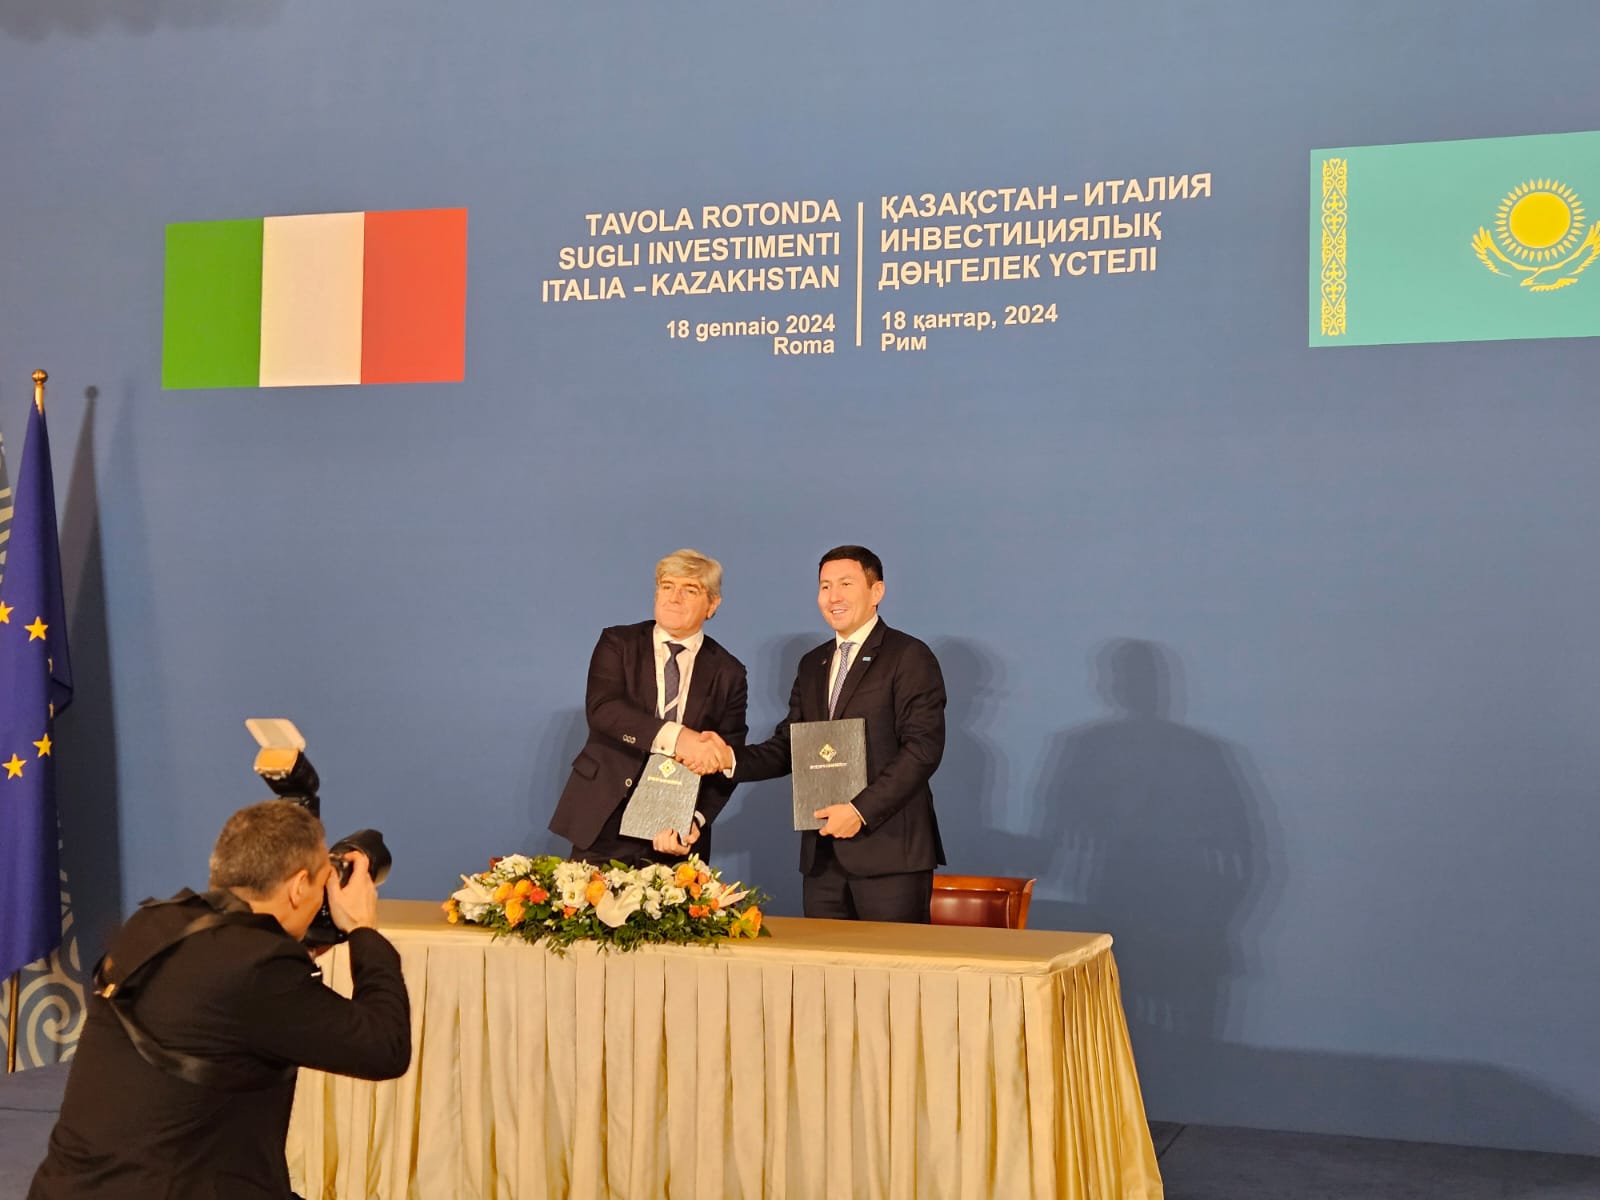 MAIRE and Kazakhstan: to cooperate on energy transition initiatives